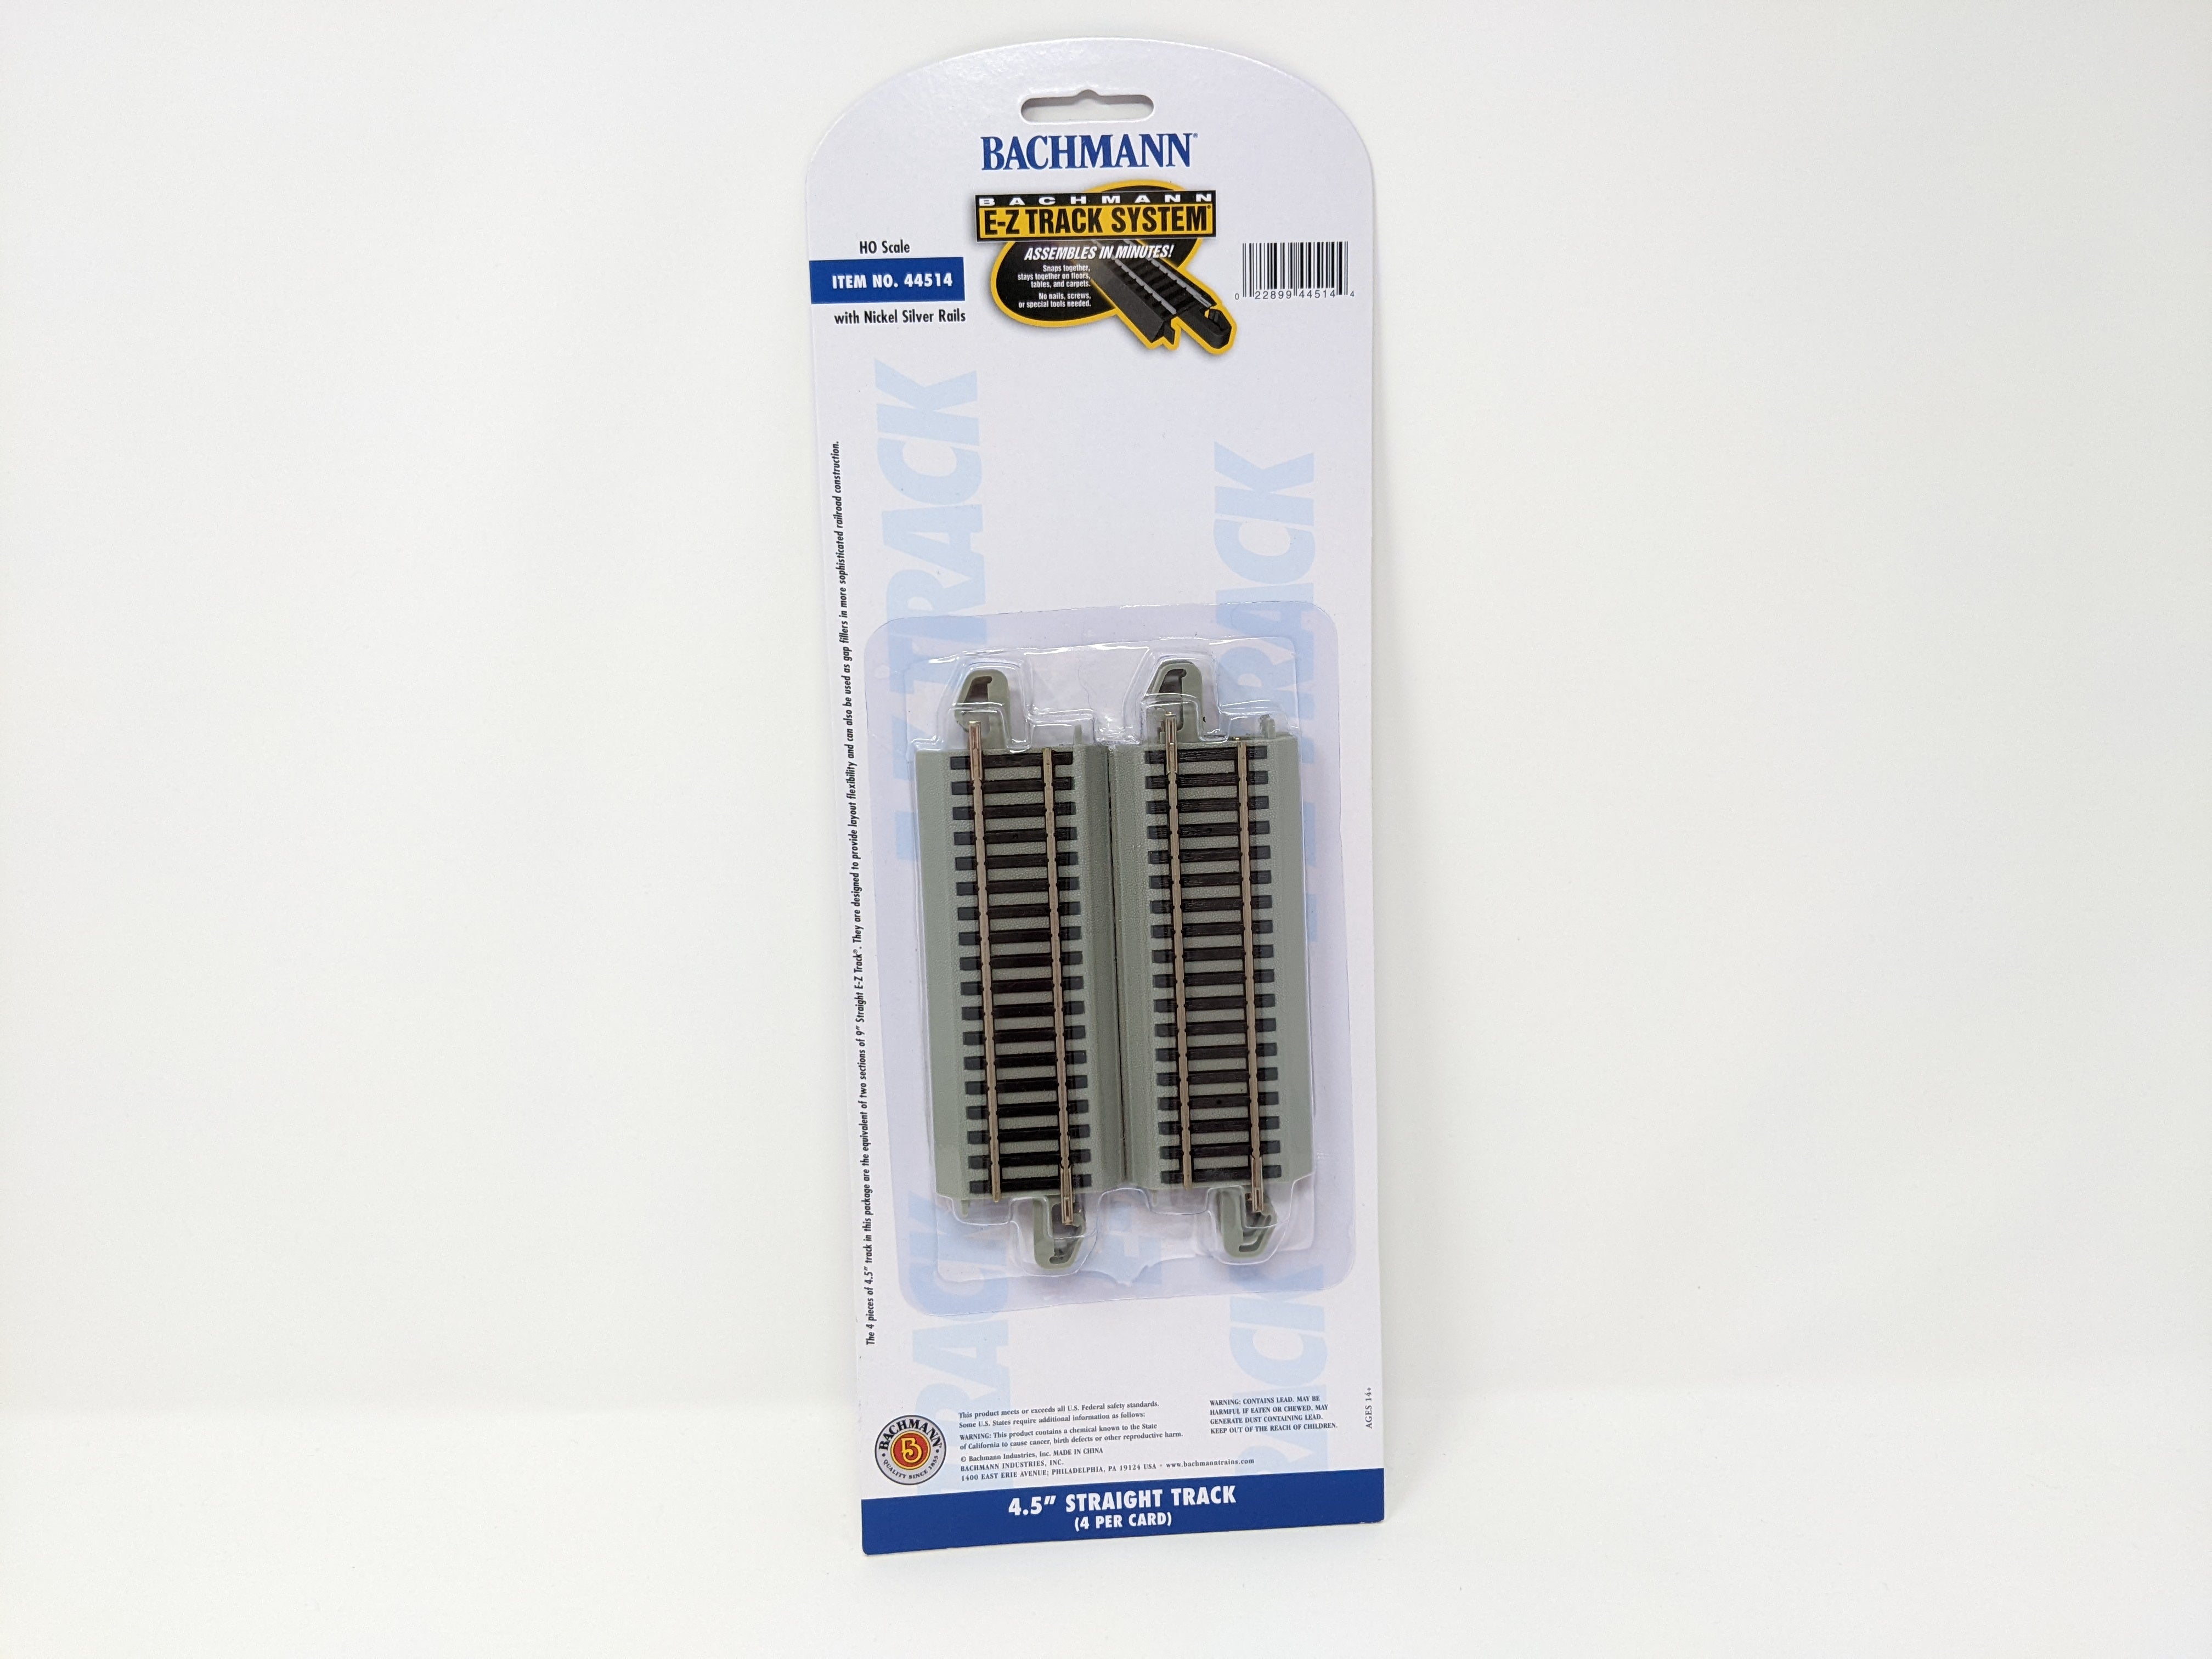 Bachmann 44514 HO Scale, E-Z Track 4.5'' Straight Track w/ Nickel Silver and Gray Roadbed (Pack of 4)